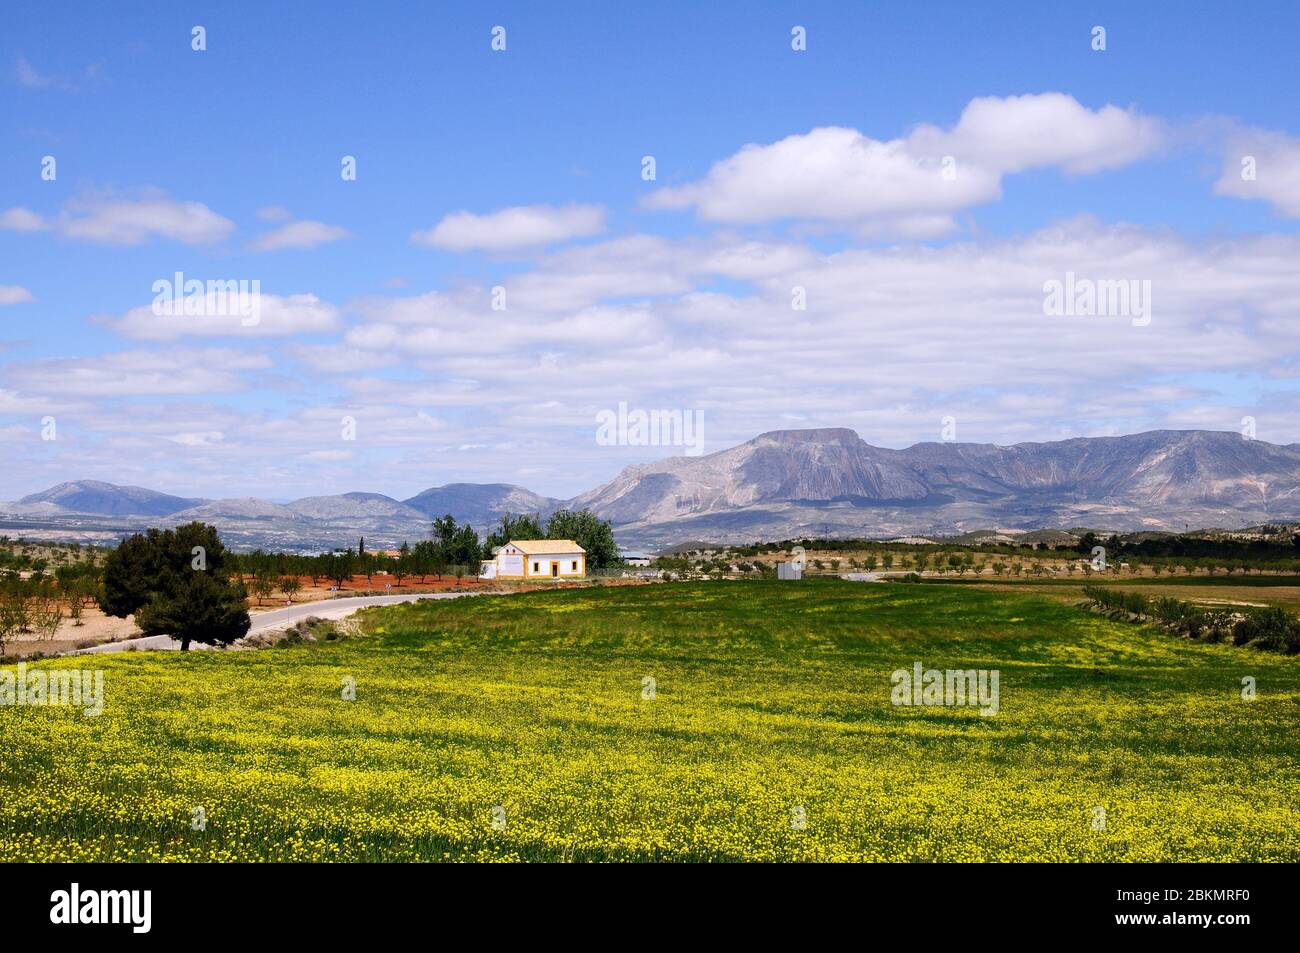 Spring flowers in field with the Sierra de Maria mountains to the rear, Puertecico, Almeria Province, Andalucia, Spain, Europe Stock Photo